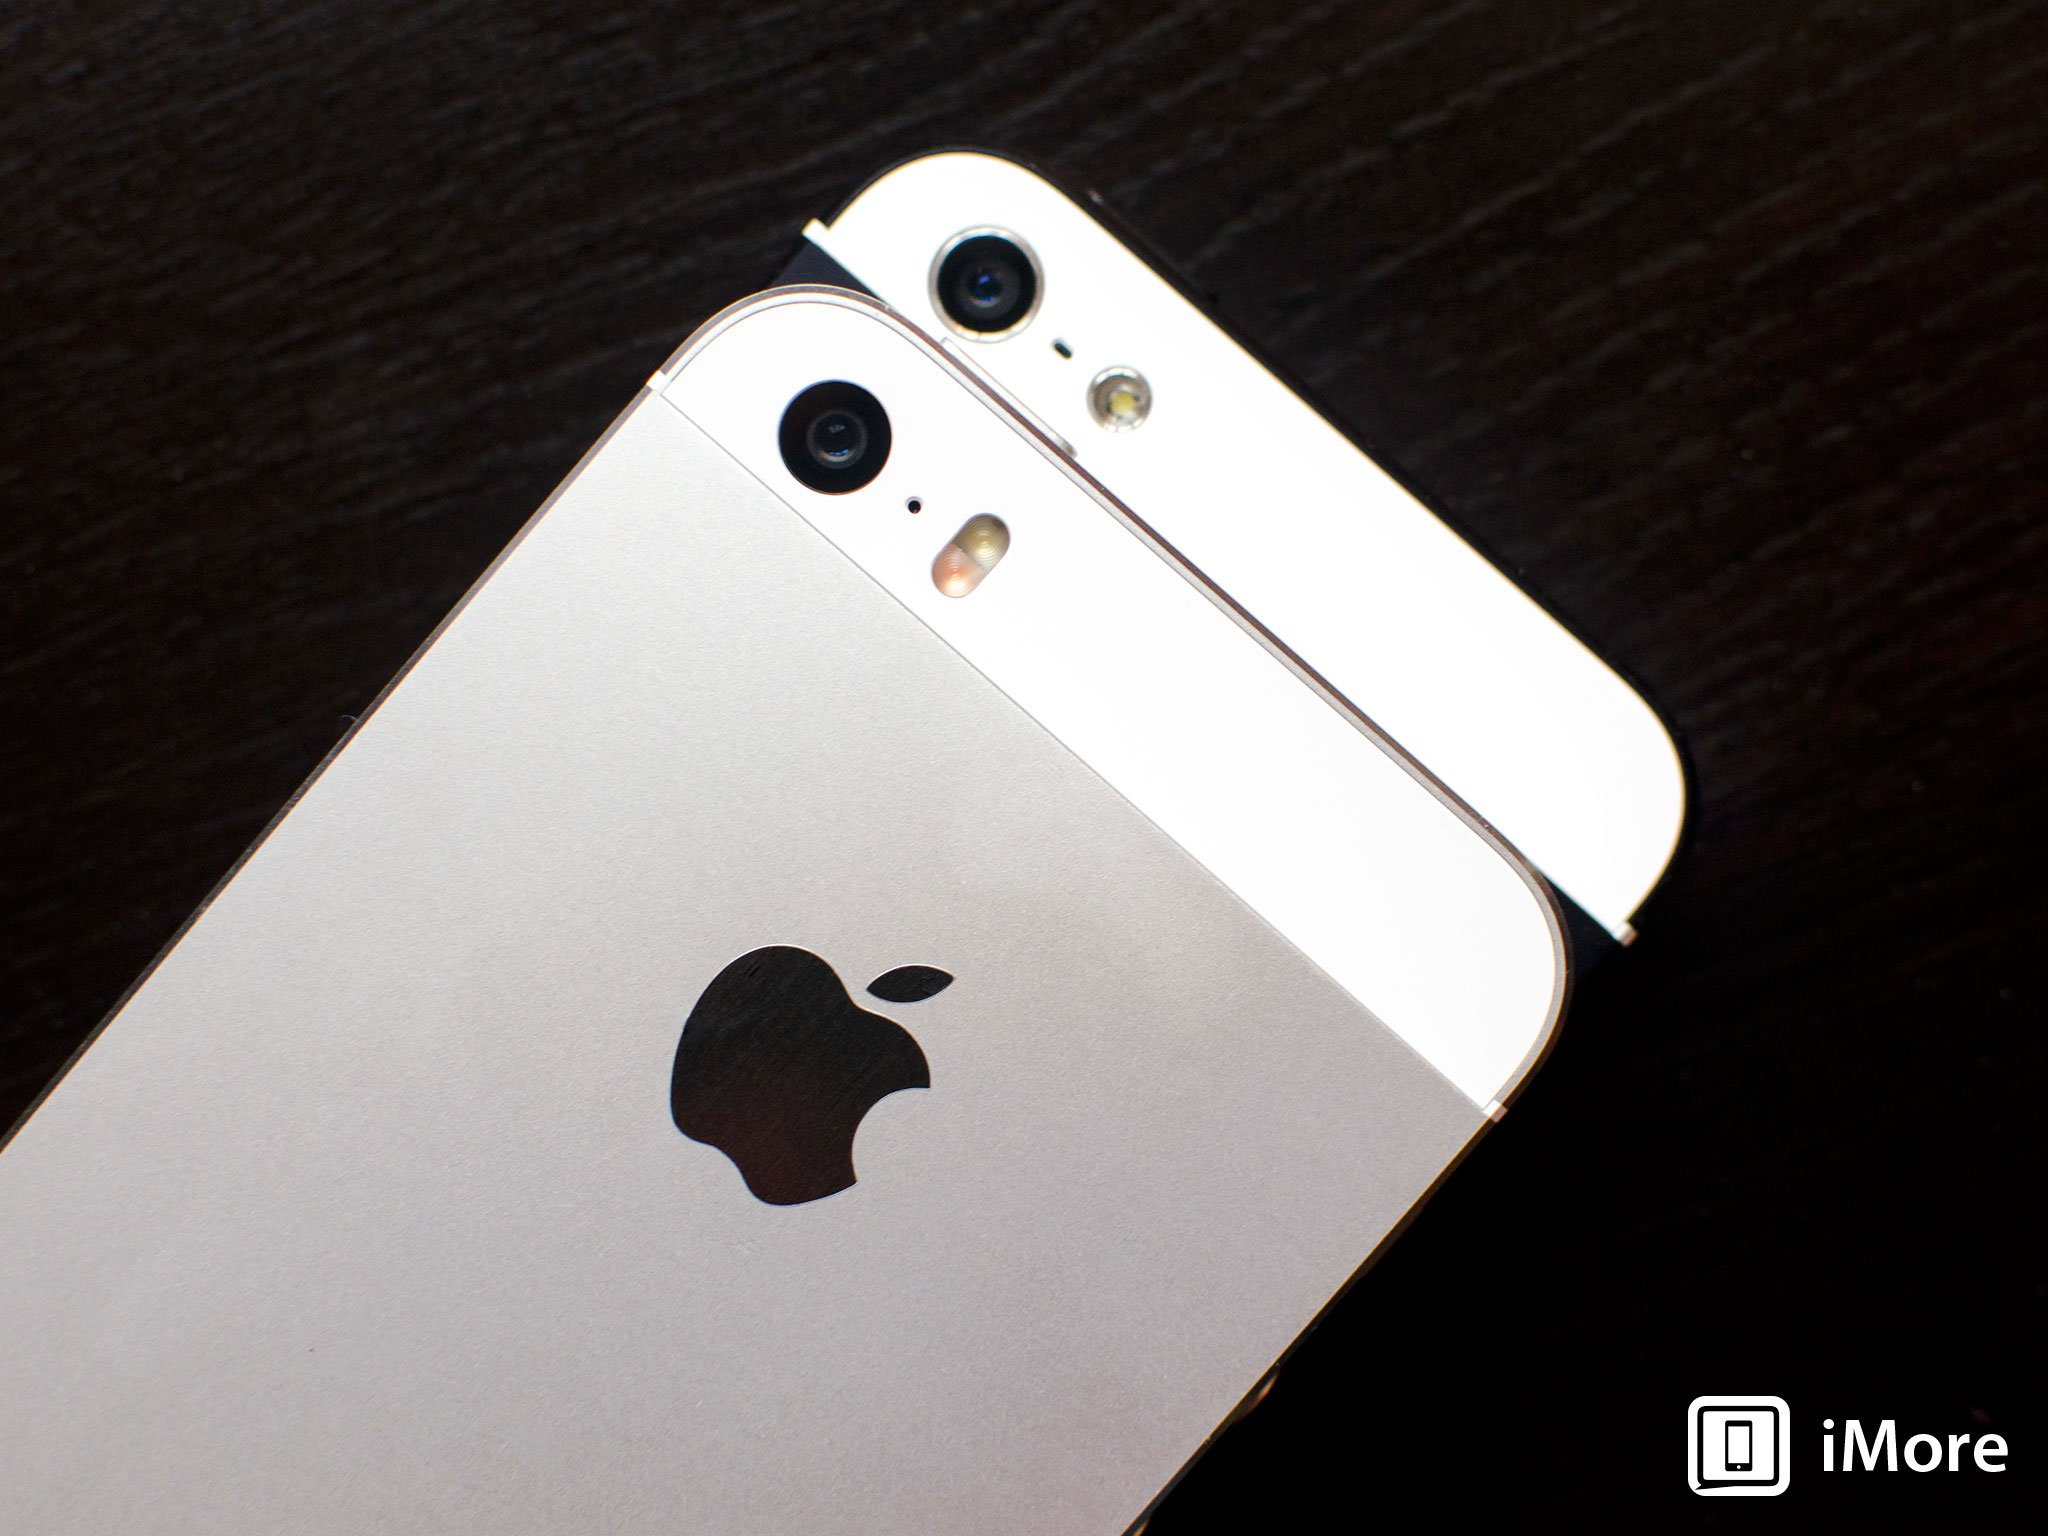 Did you notice the iPhone 5s is missing certain hardware aesthetics the iPhone 5 had?